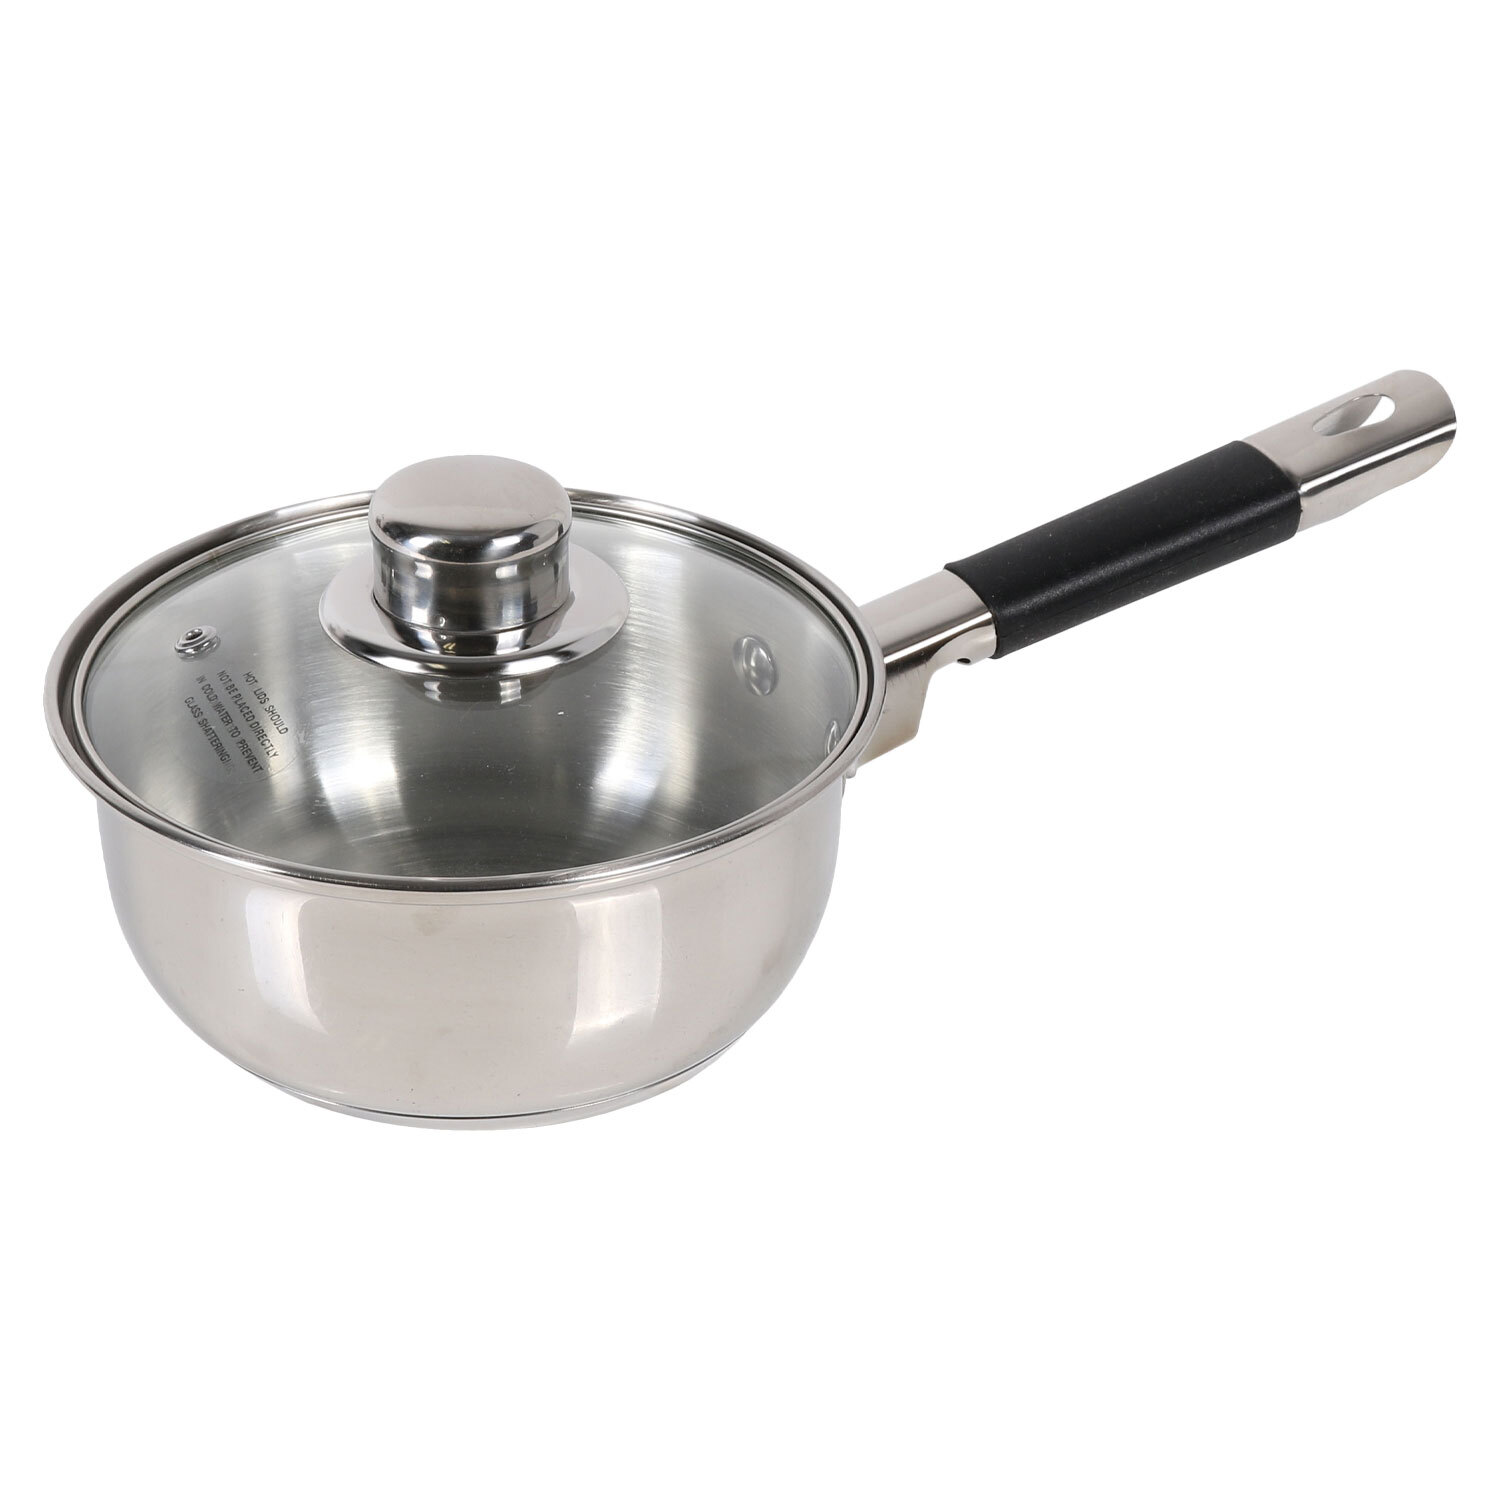 16cm Stainless Steel Saucepan with Lid Image 1